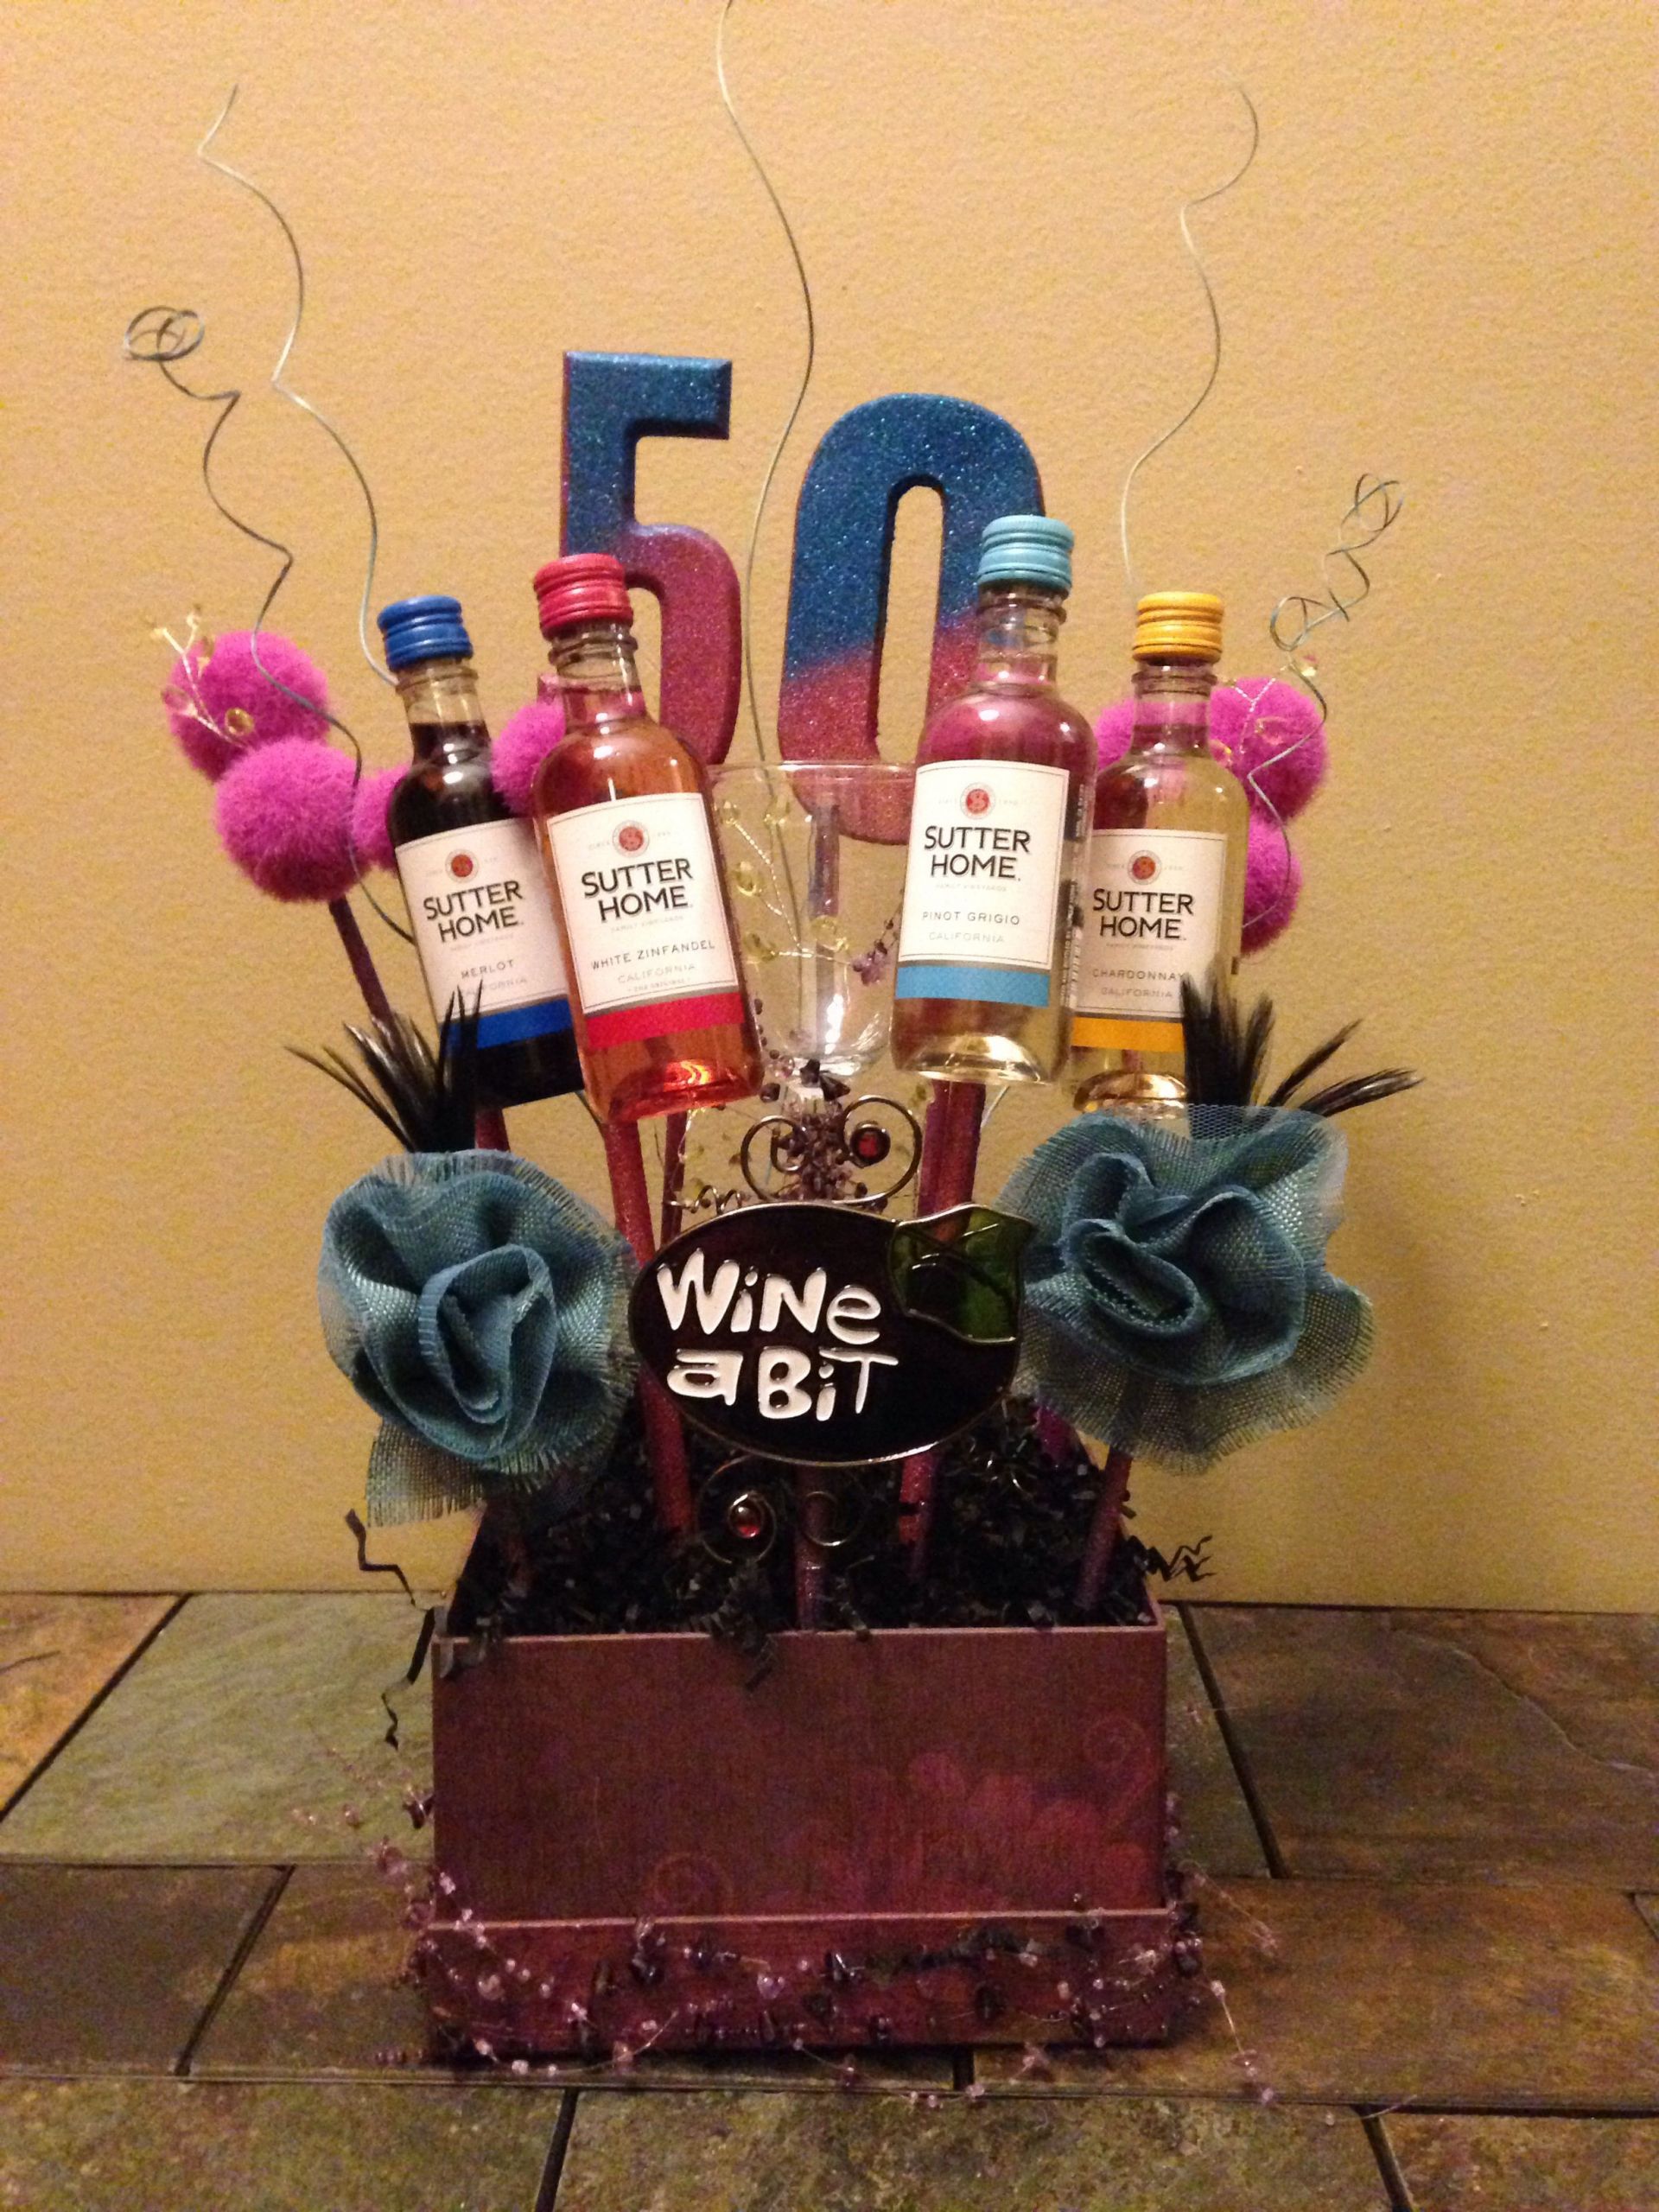 The Best Ideas for Funny 50th Birthday Gift Ideas - Home, Family, Style